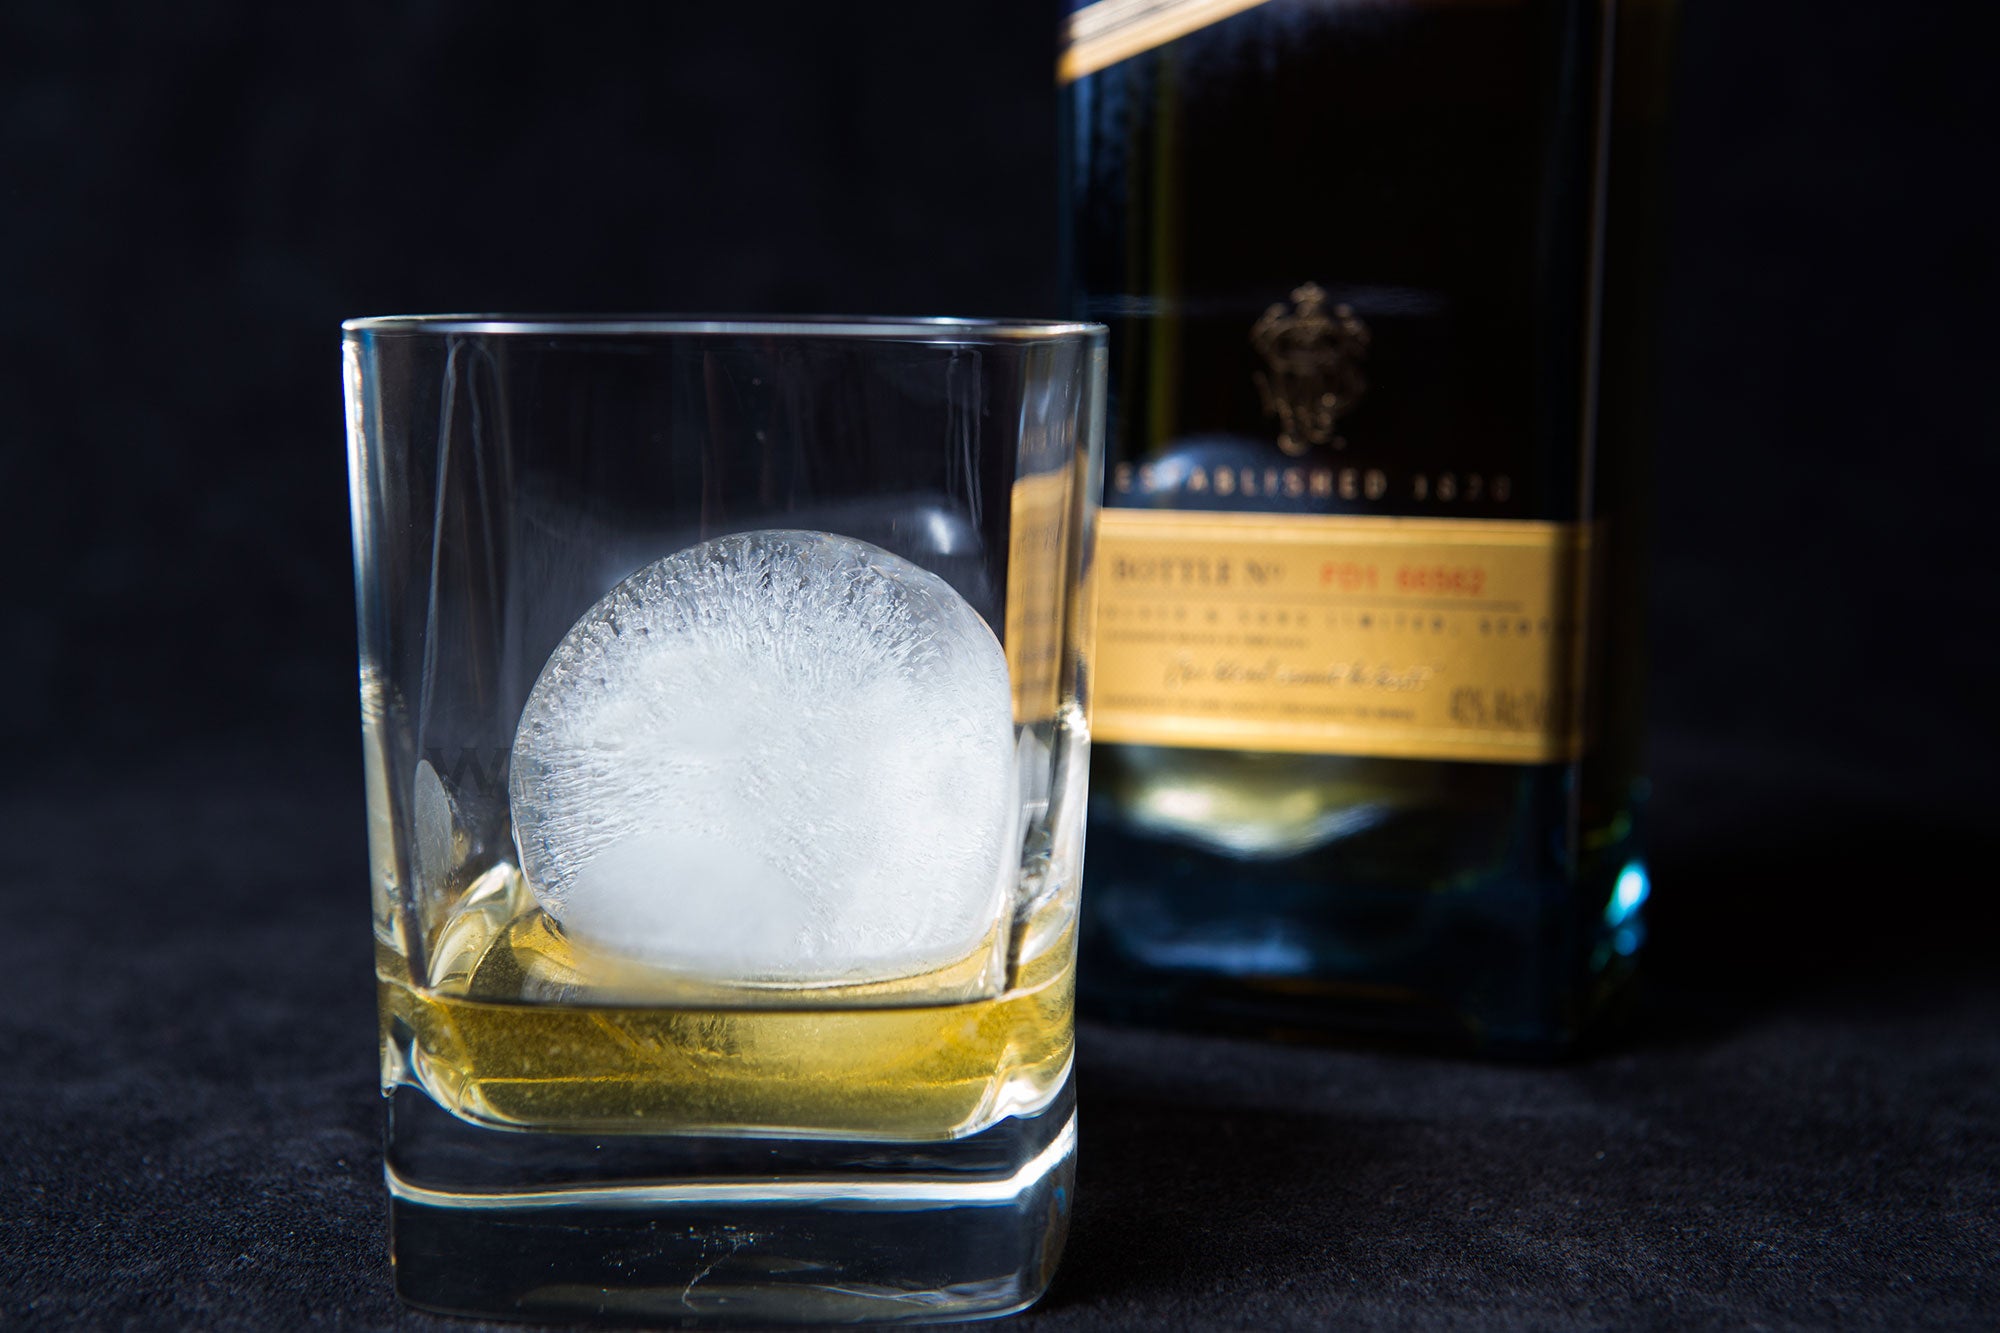 Whiskey Glass and Ice Ball Mold Gift Set , 10 oz Whiskey Glass